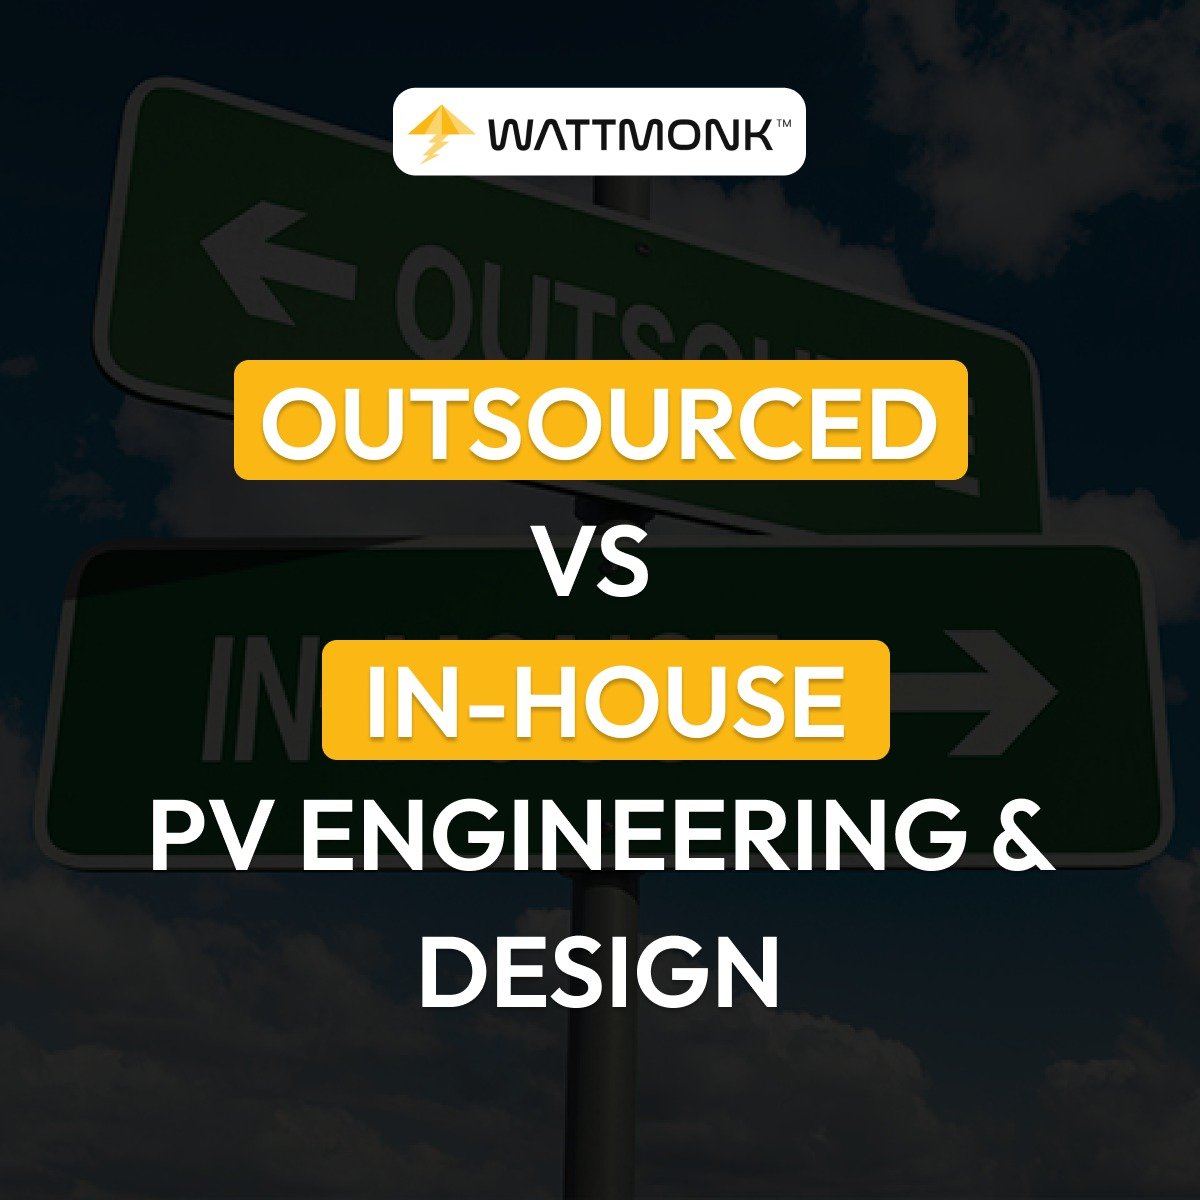 Outsourced vs In-house PV Engineering & Design